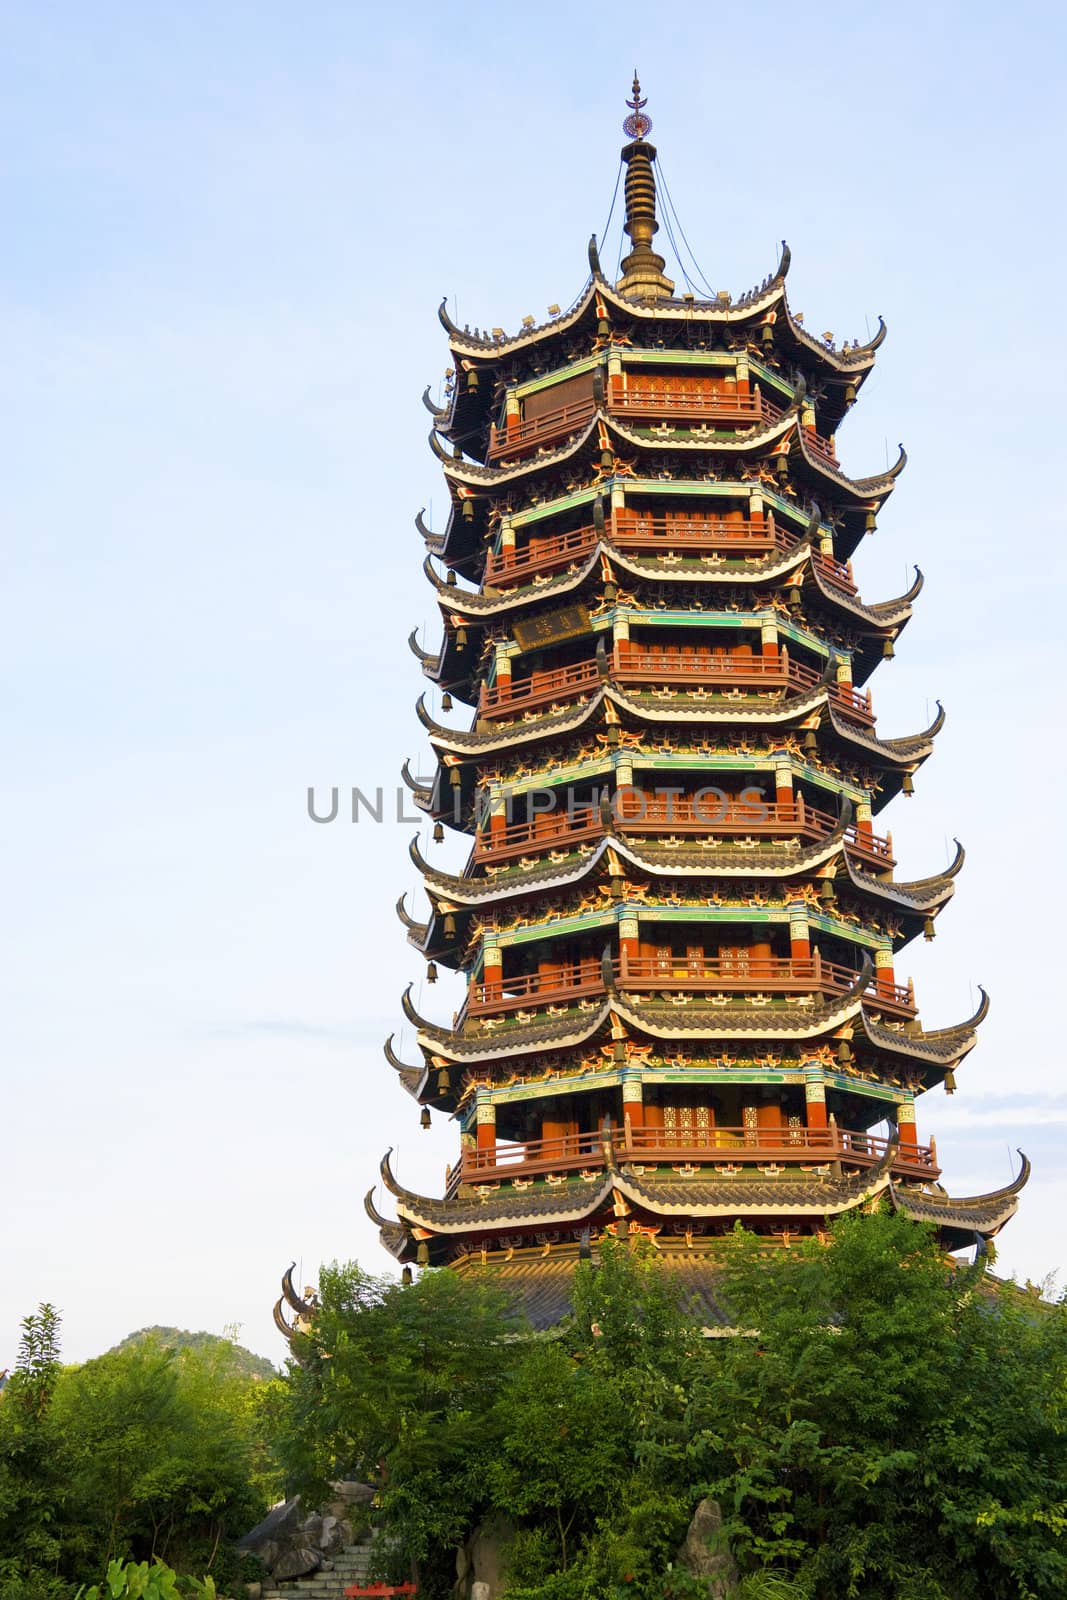 Image of the Moon Pagoda at Guilin, China. This pagoda is one of the two pagodas located side by side which together are known as the Sun and Moon Pagodas of Guilin.